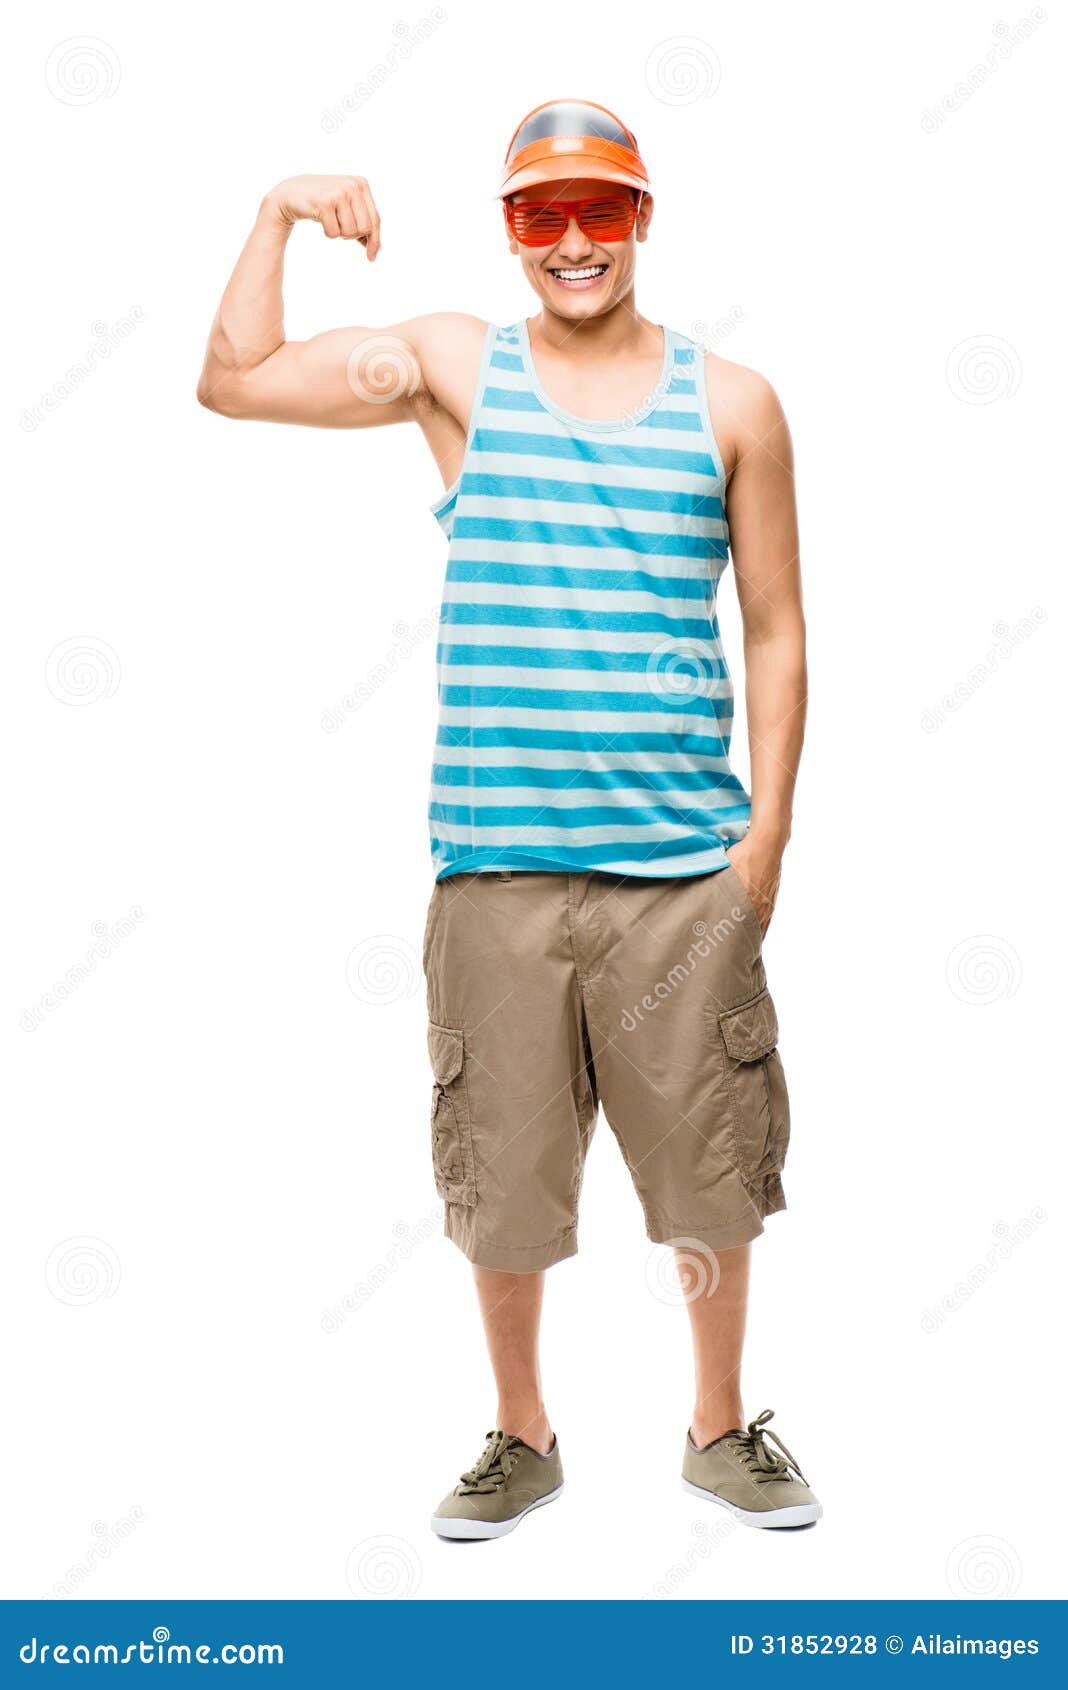 Muscle man showing muscles stock photo. Image of body - 31852928